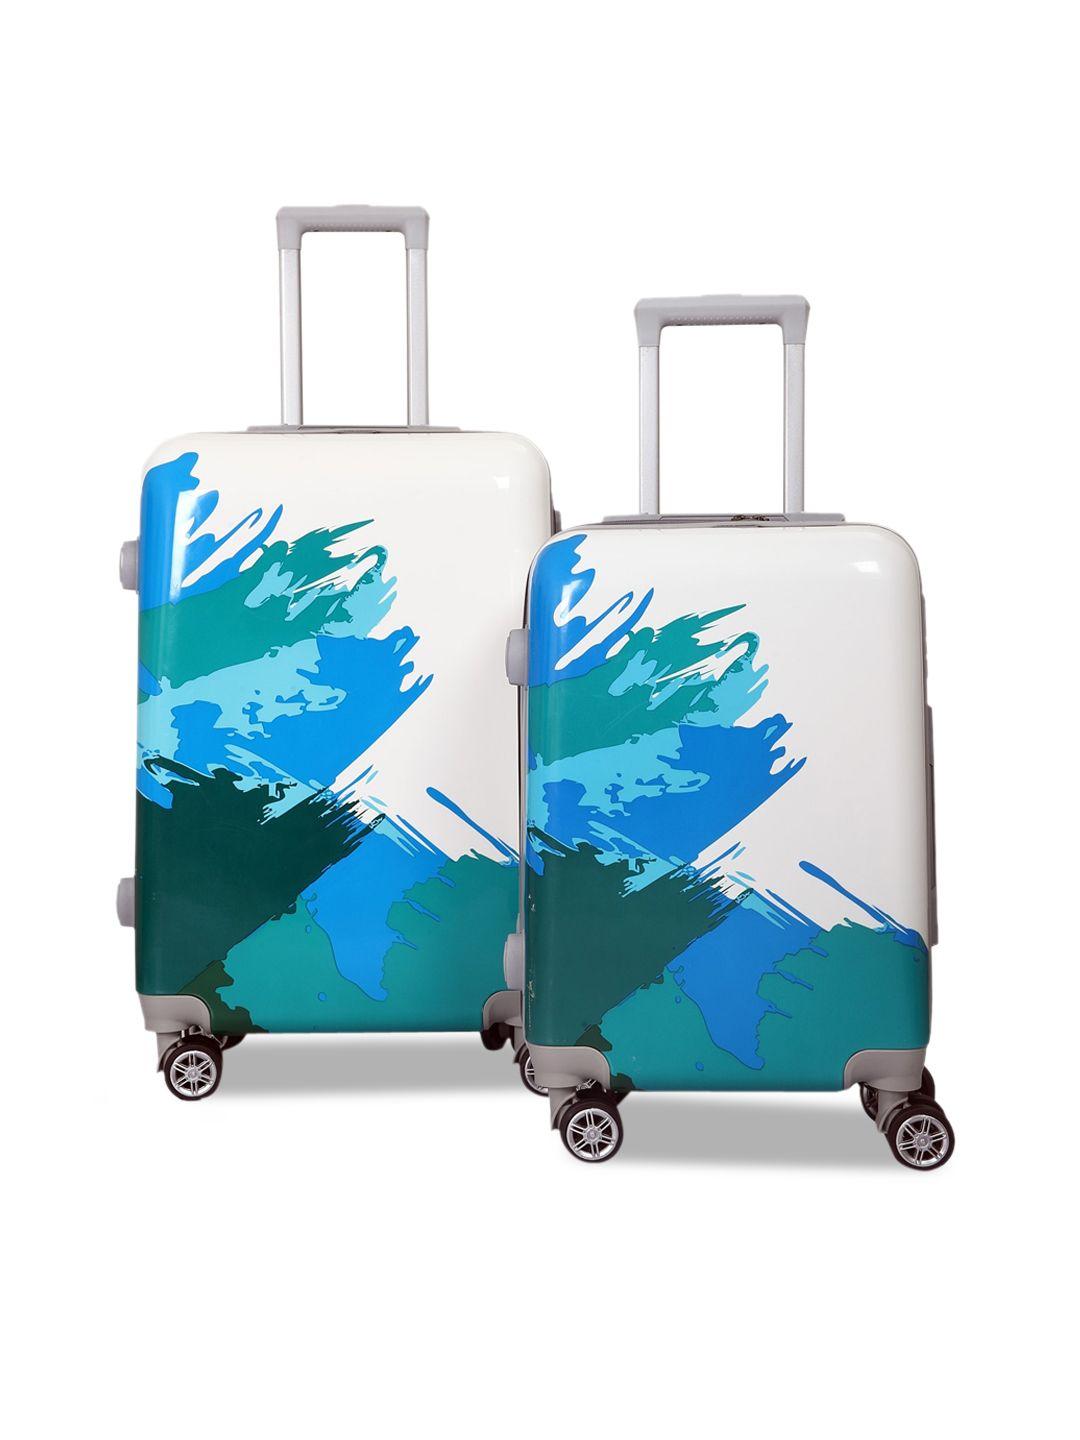 polo class set of 2 hard-sided trolley suitcases